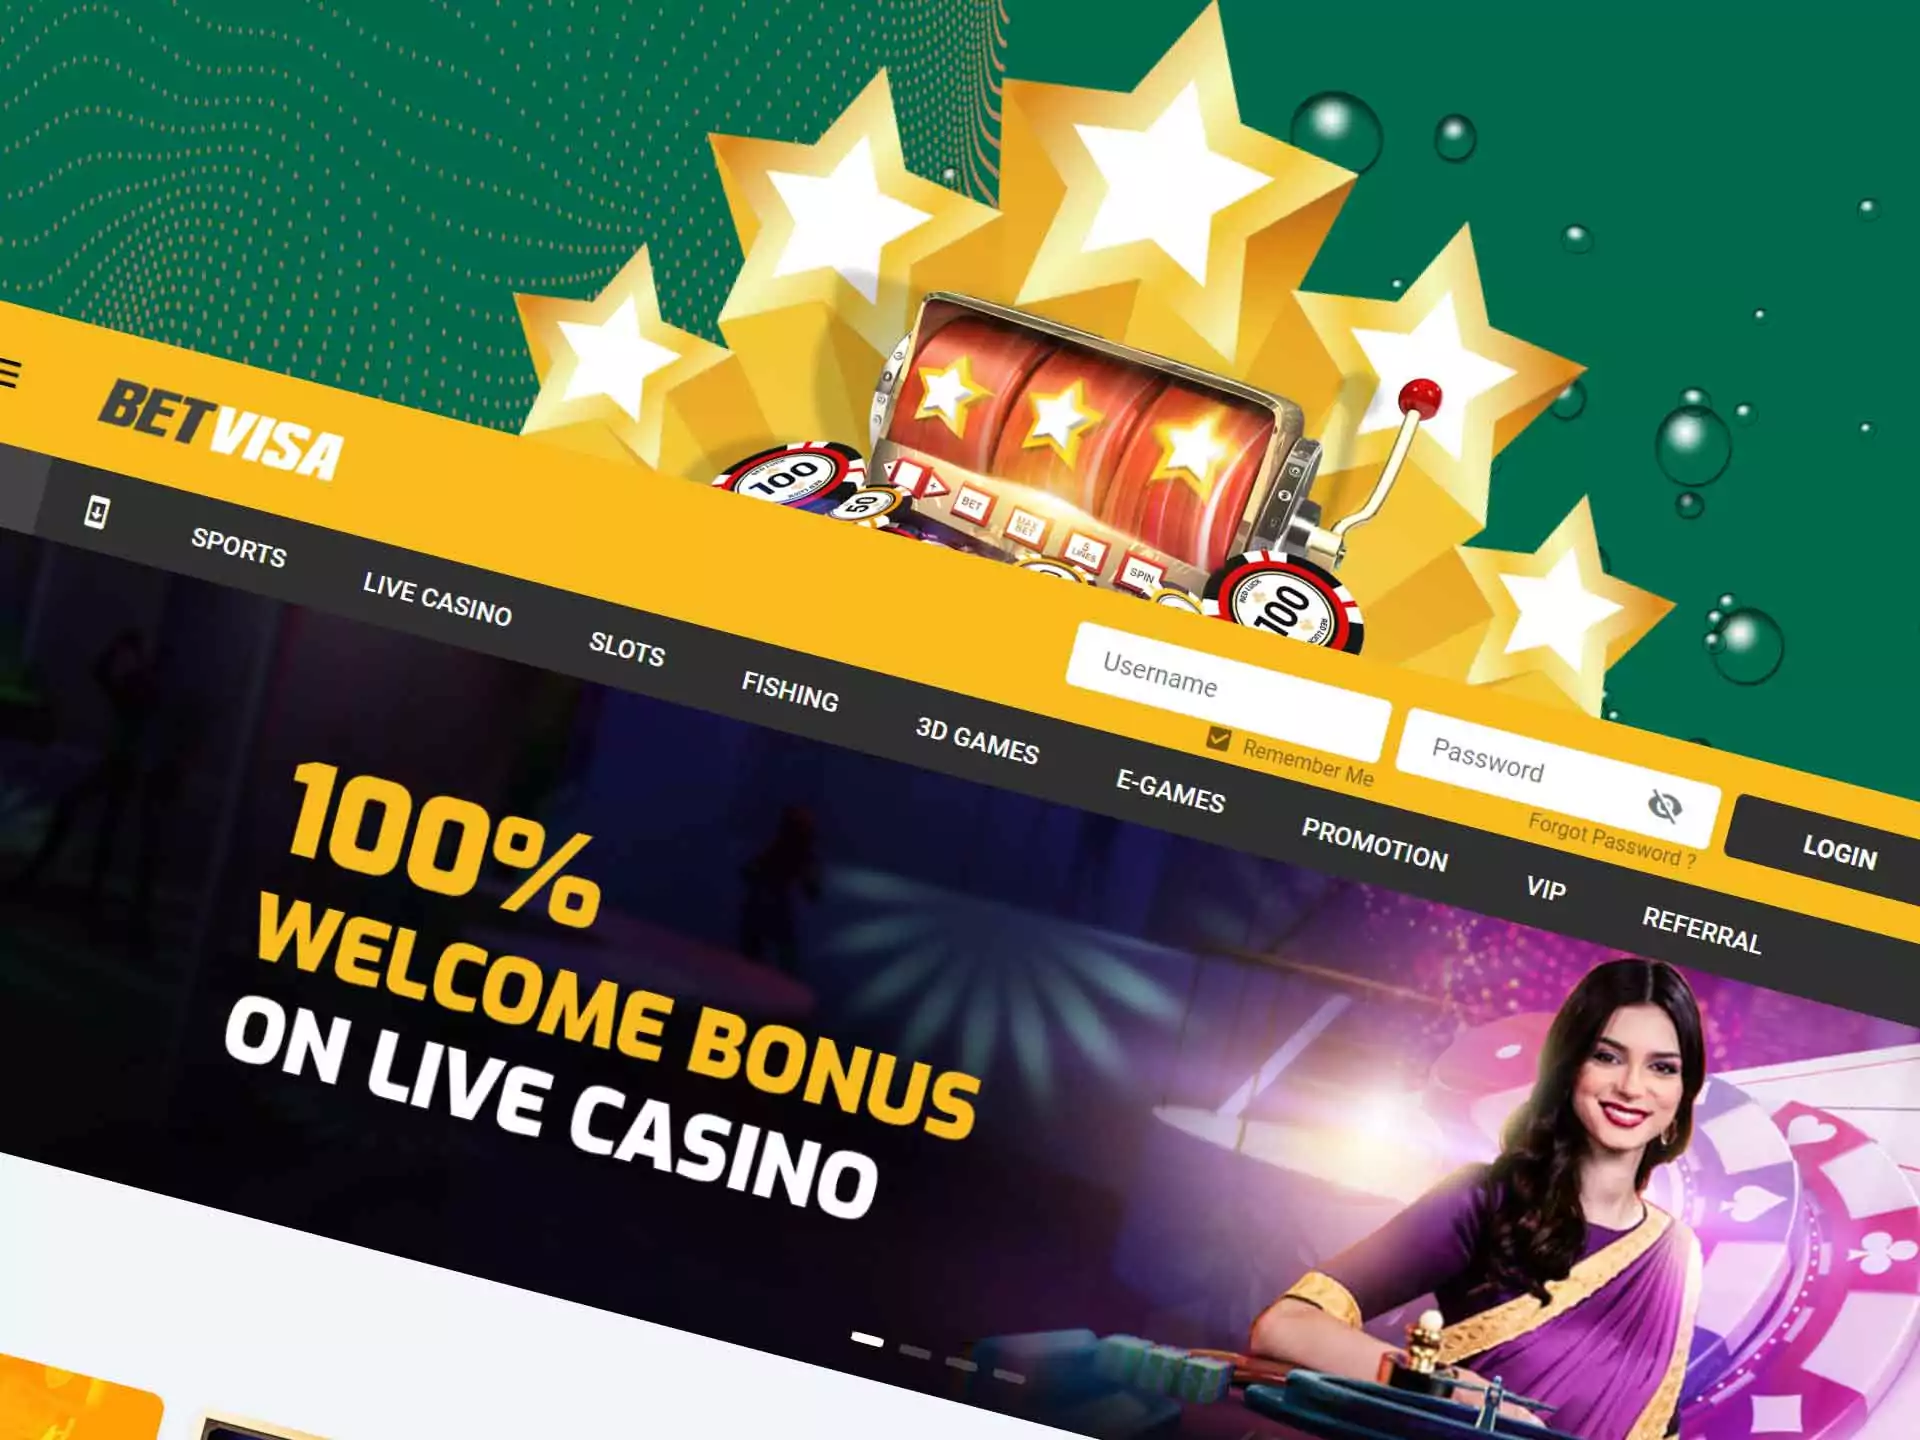 Get + 300% to your first deposit and use it in the casino games.